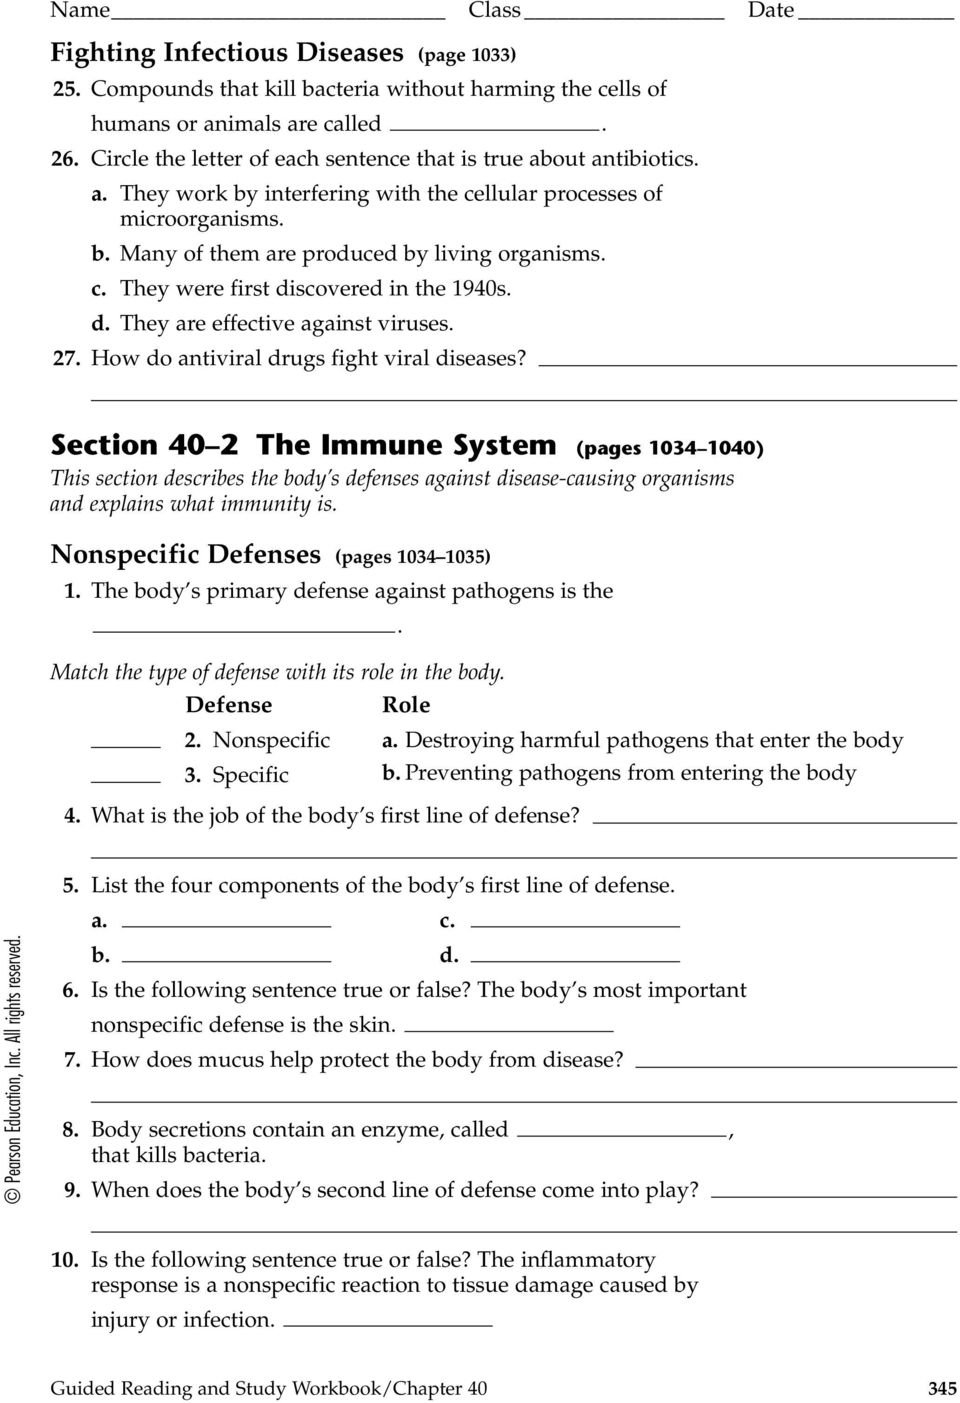 The Immune System And Disease  Pdf As Well As Chapter 24 The Immune System And Disease Worksheet Answer Key